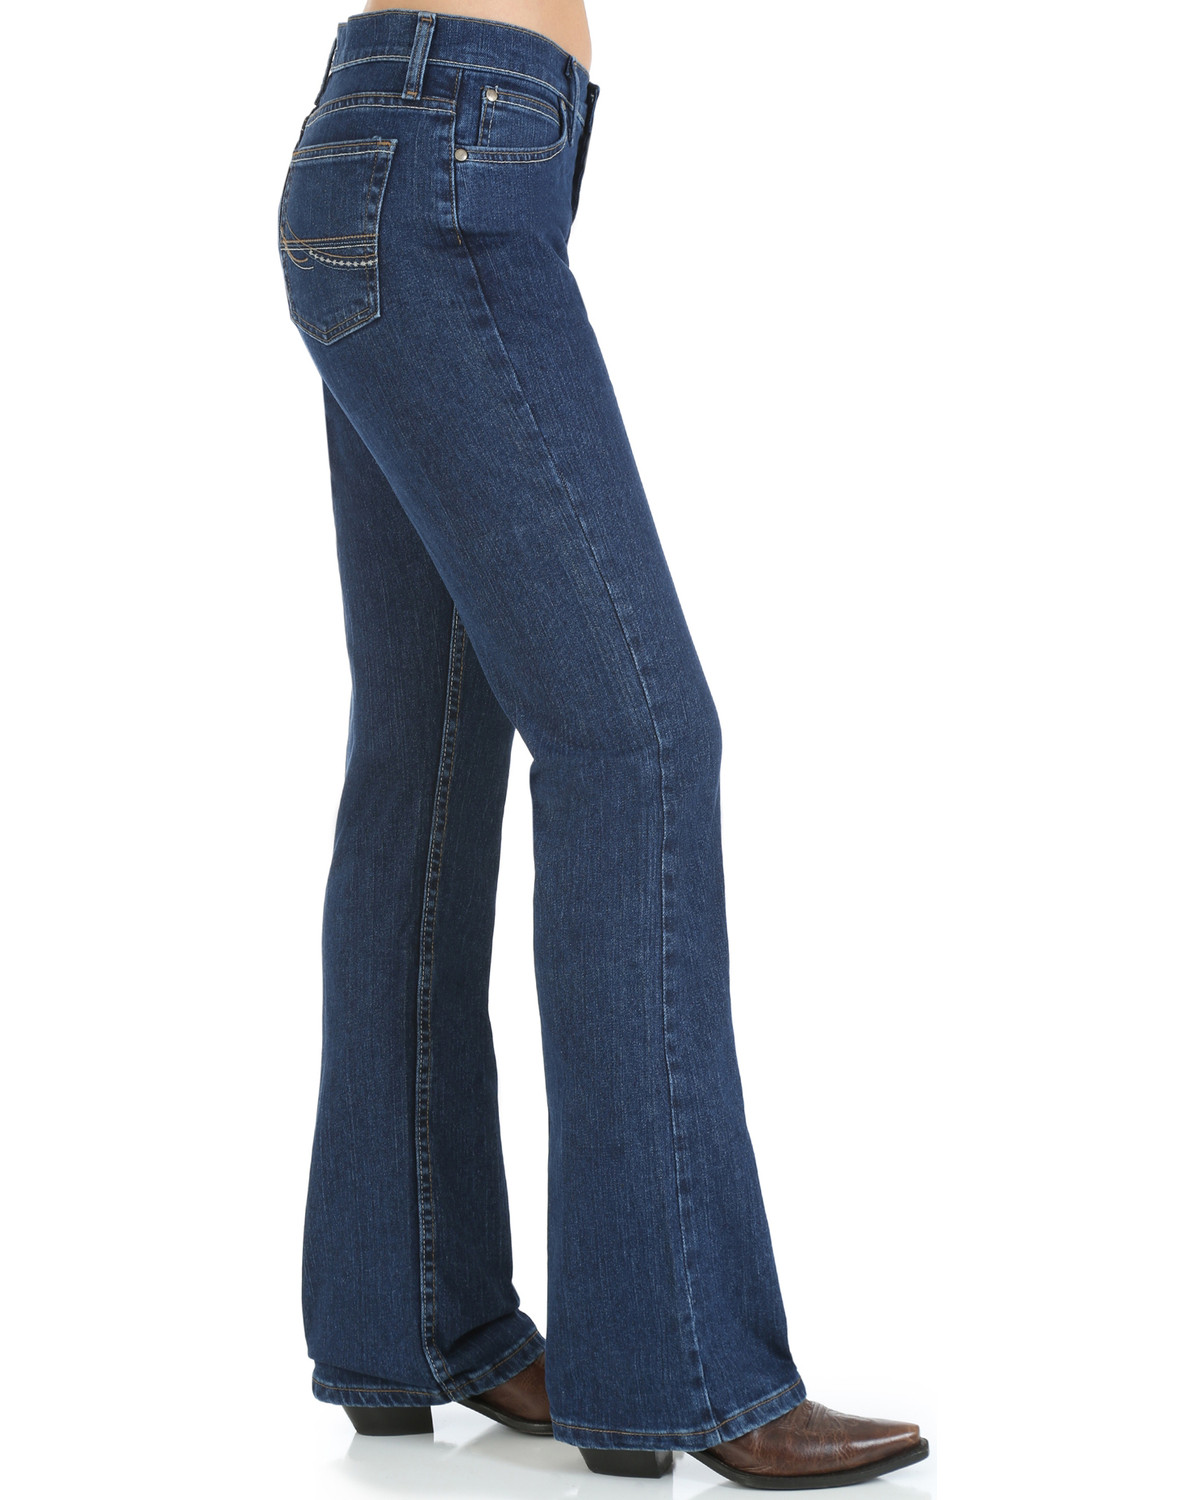 Wrangler Women's As Real As Wrangler Classic Fit Bootcut Jeans | Sheplers